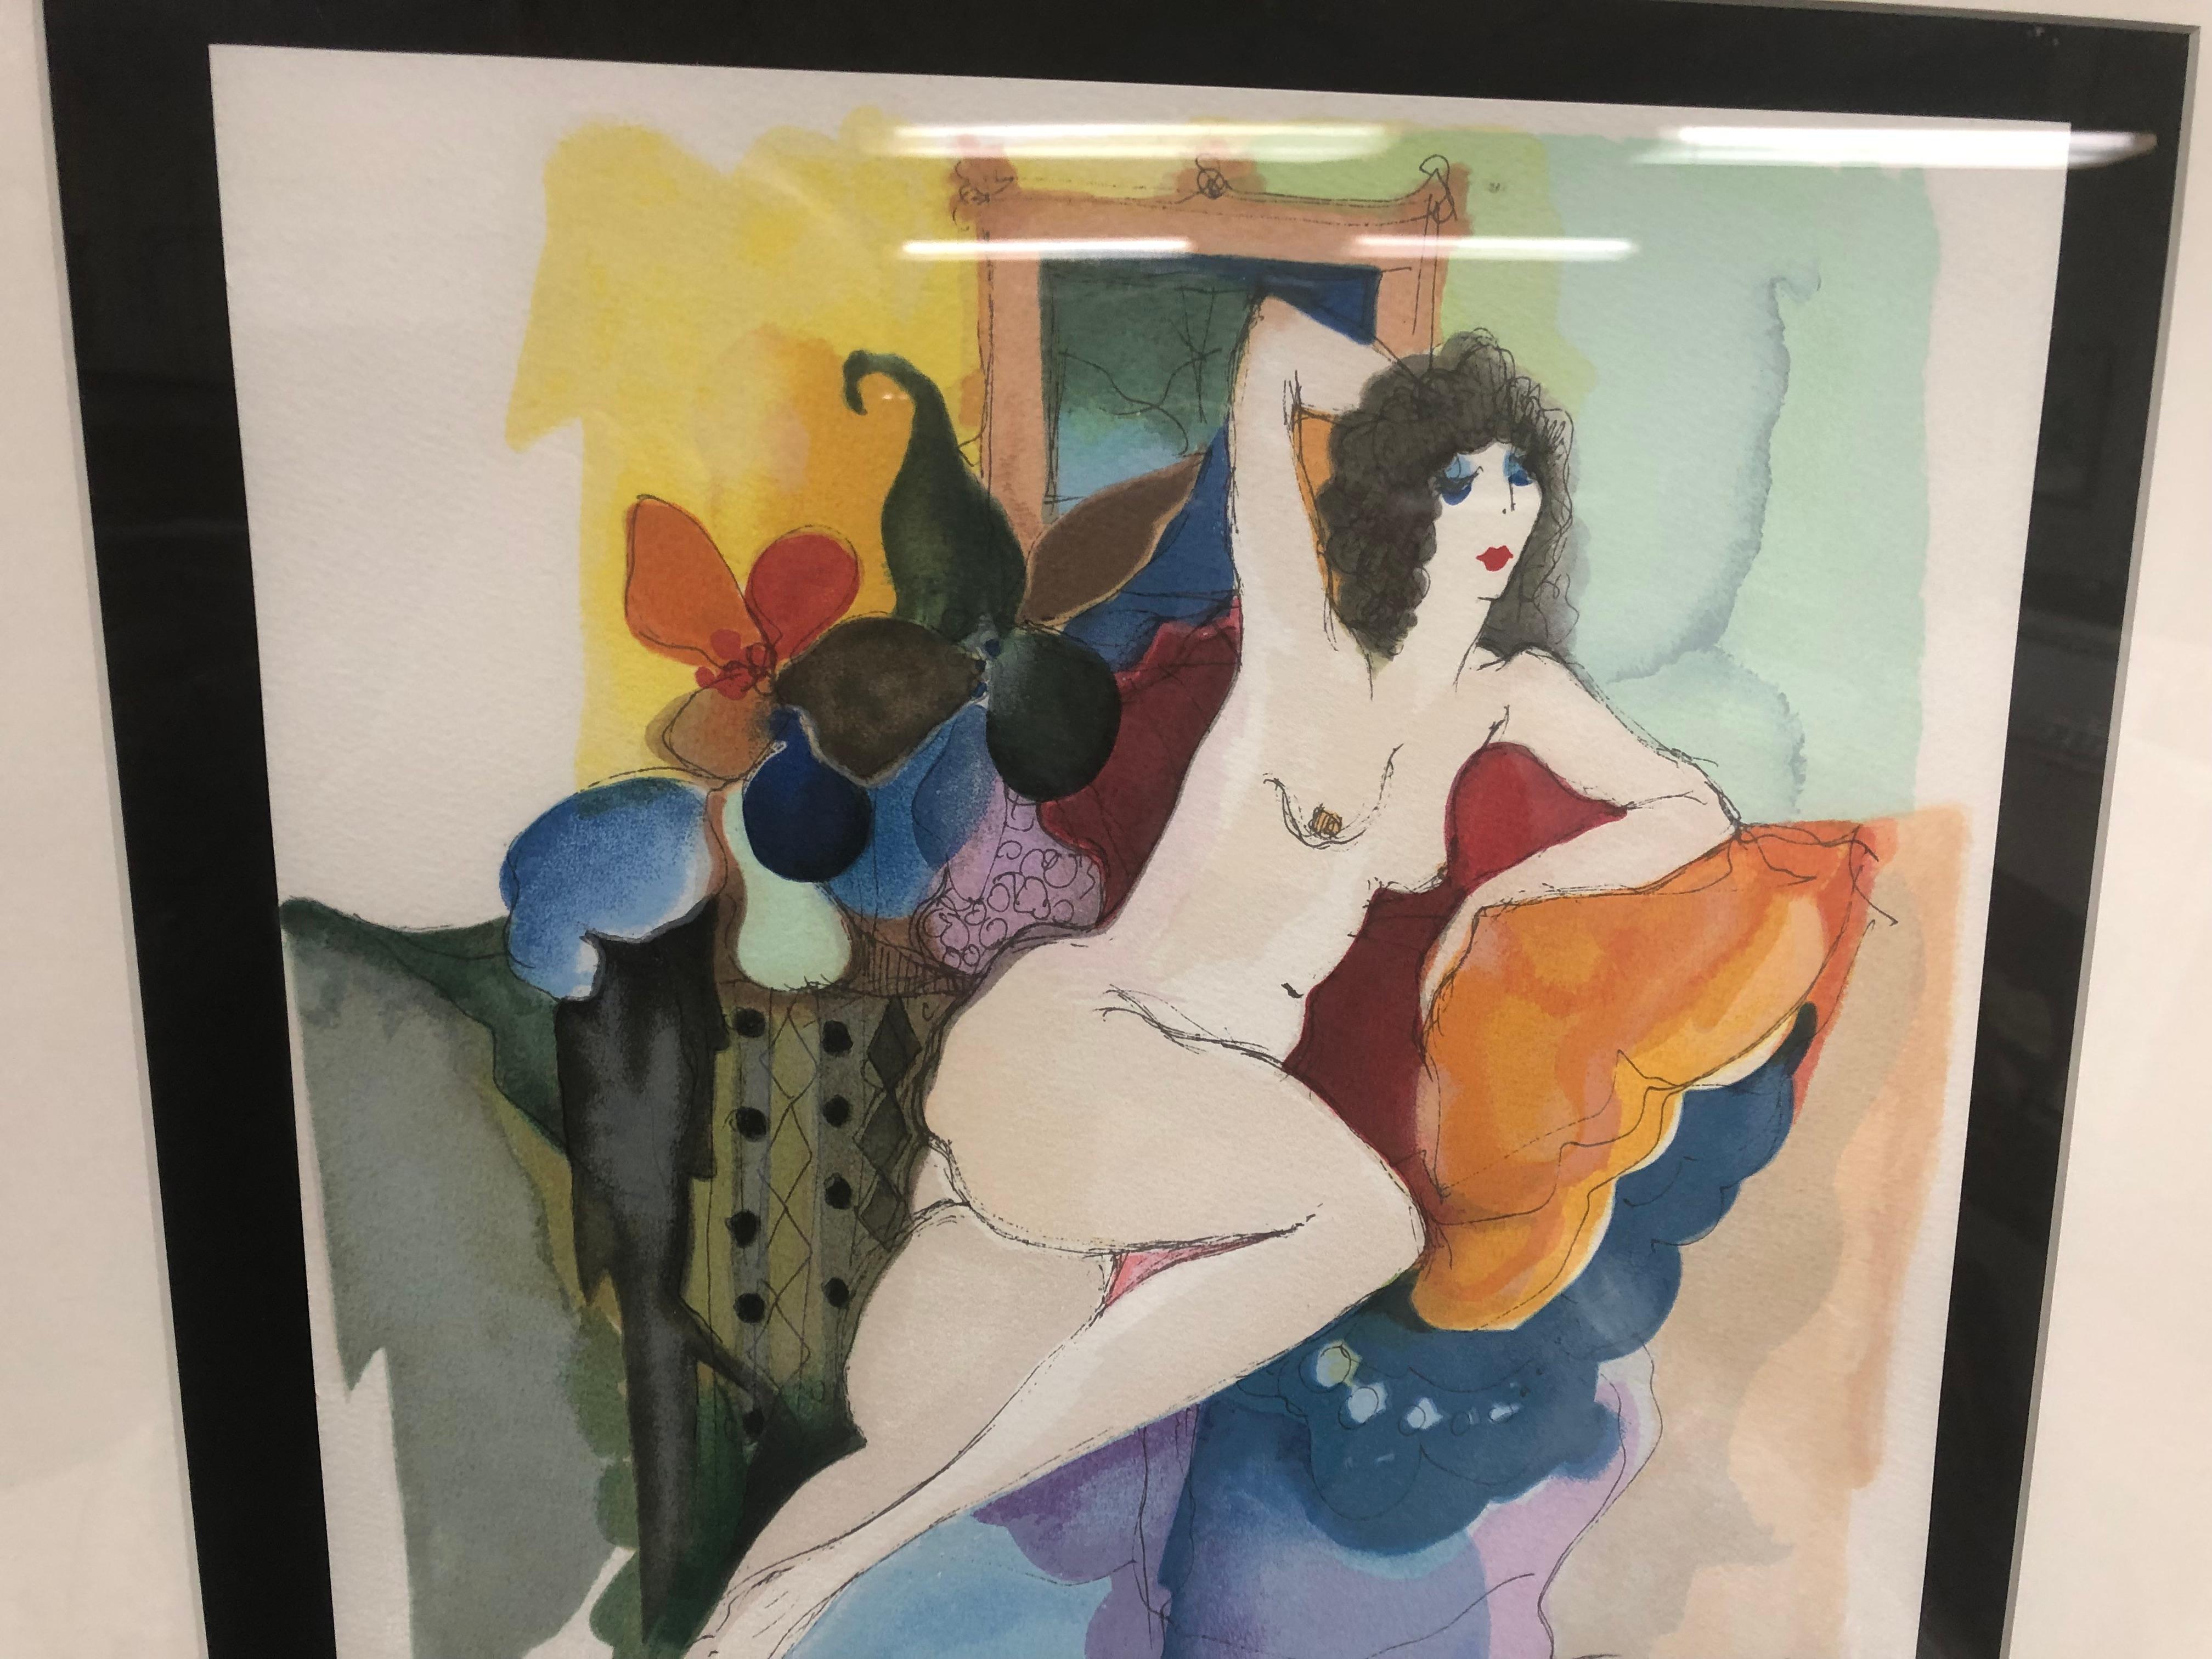 1999 Itzchak Tarkay 'Amelie Reclining' hand signed lithograph For Sale 5